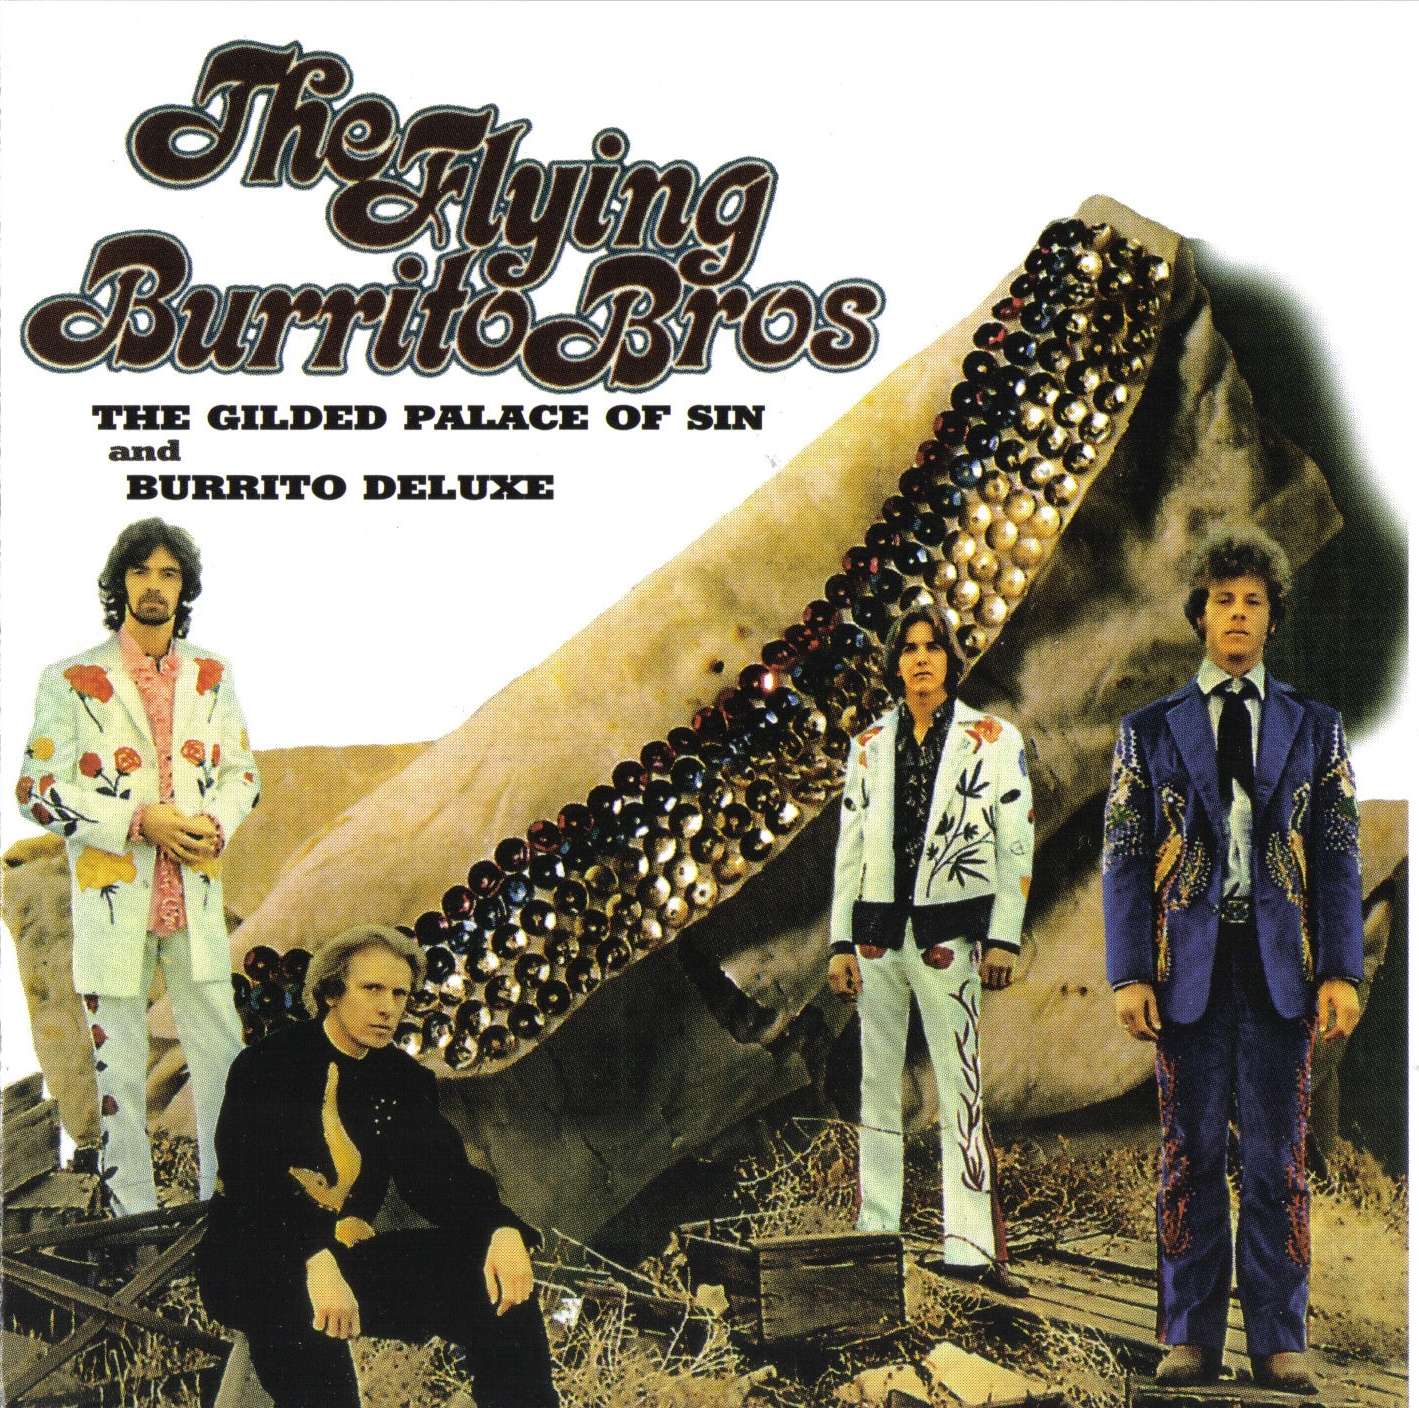 Flying Burrito Brothers - 1969 - The Gilded Palace Of Sin [2017 SACD] FLAC+MP3 24-88.2